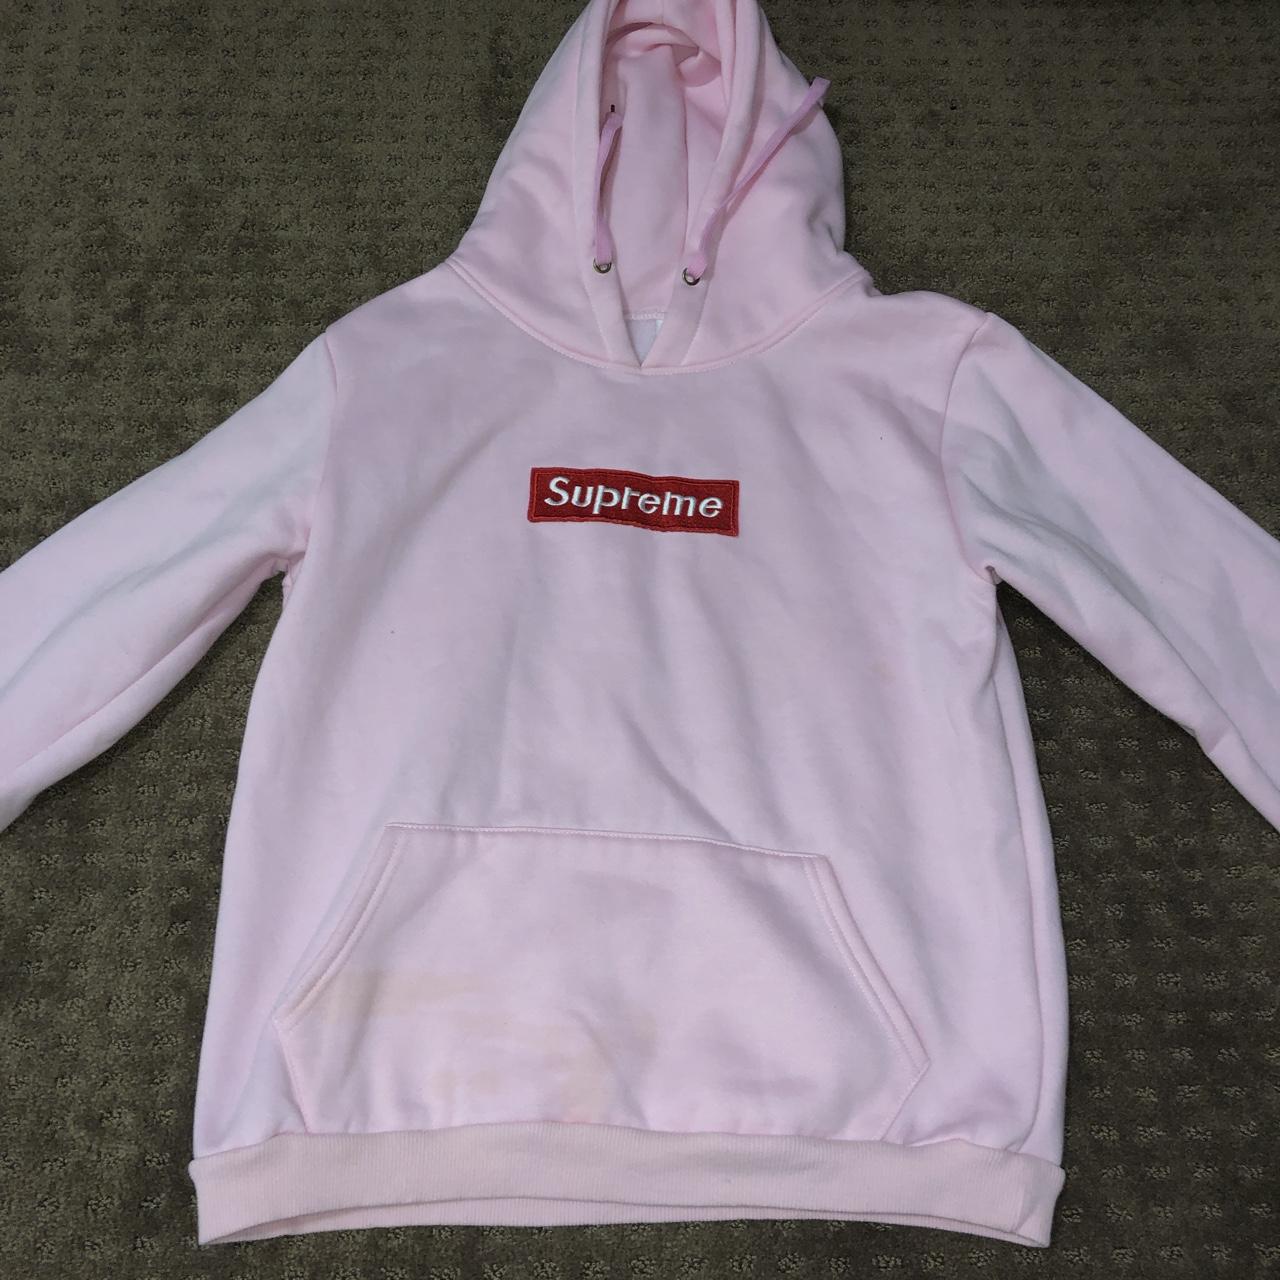 my local thrift is selling this tragic fake supreme hoodie for